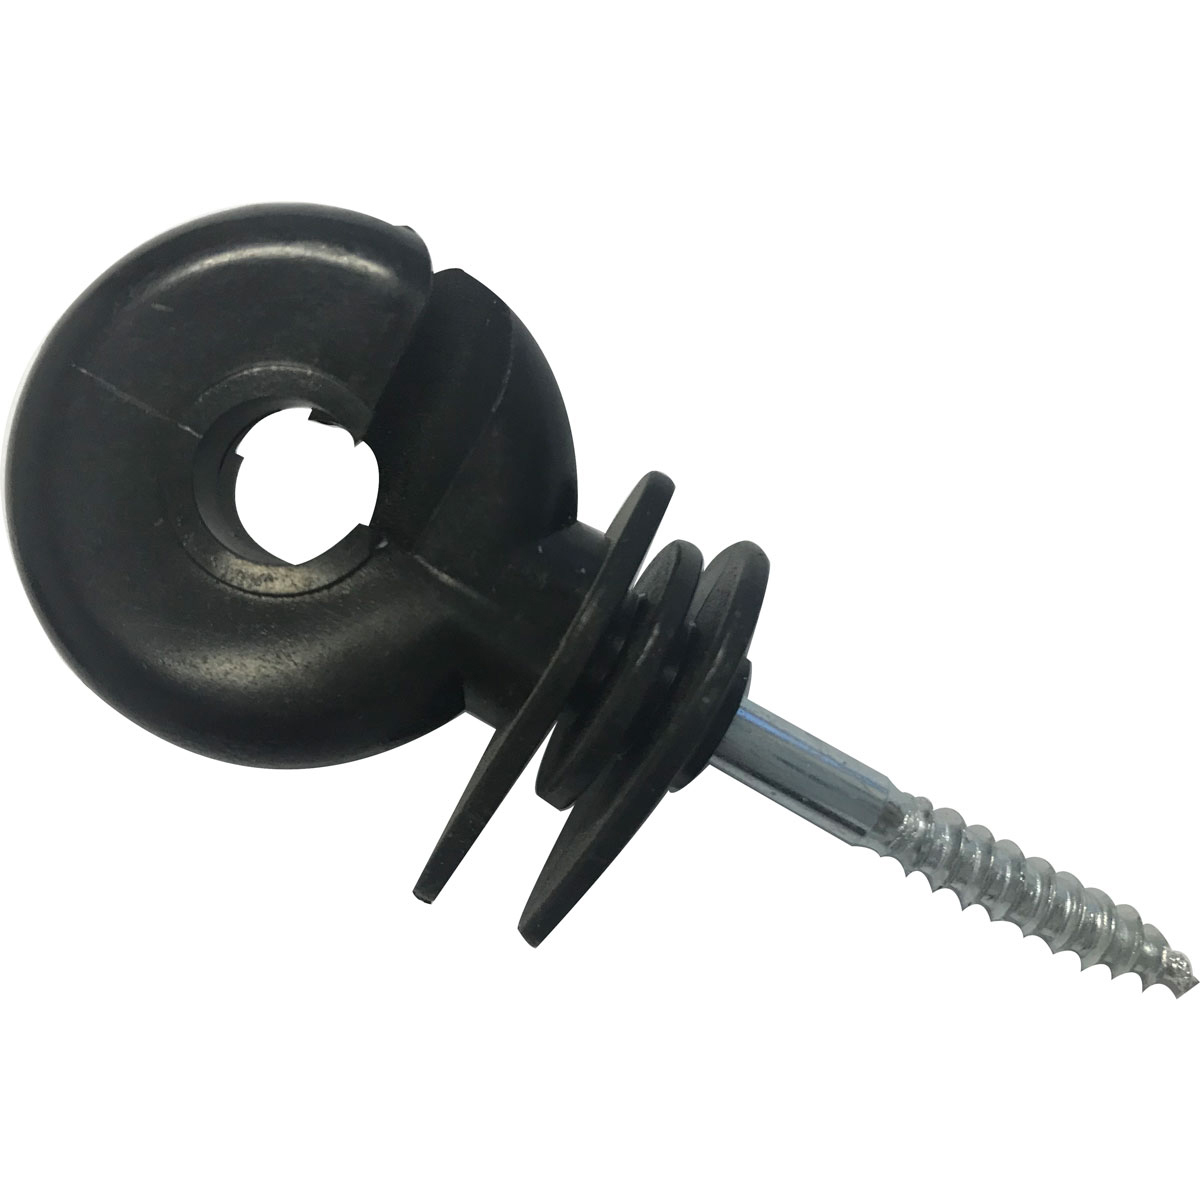 TAPE INSULATORS x 100 Electric Fencing Fence Screw In Poly Clips 40mm 20mm 